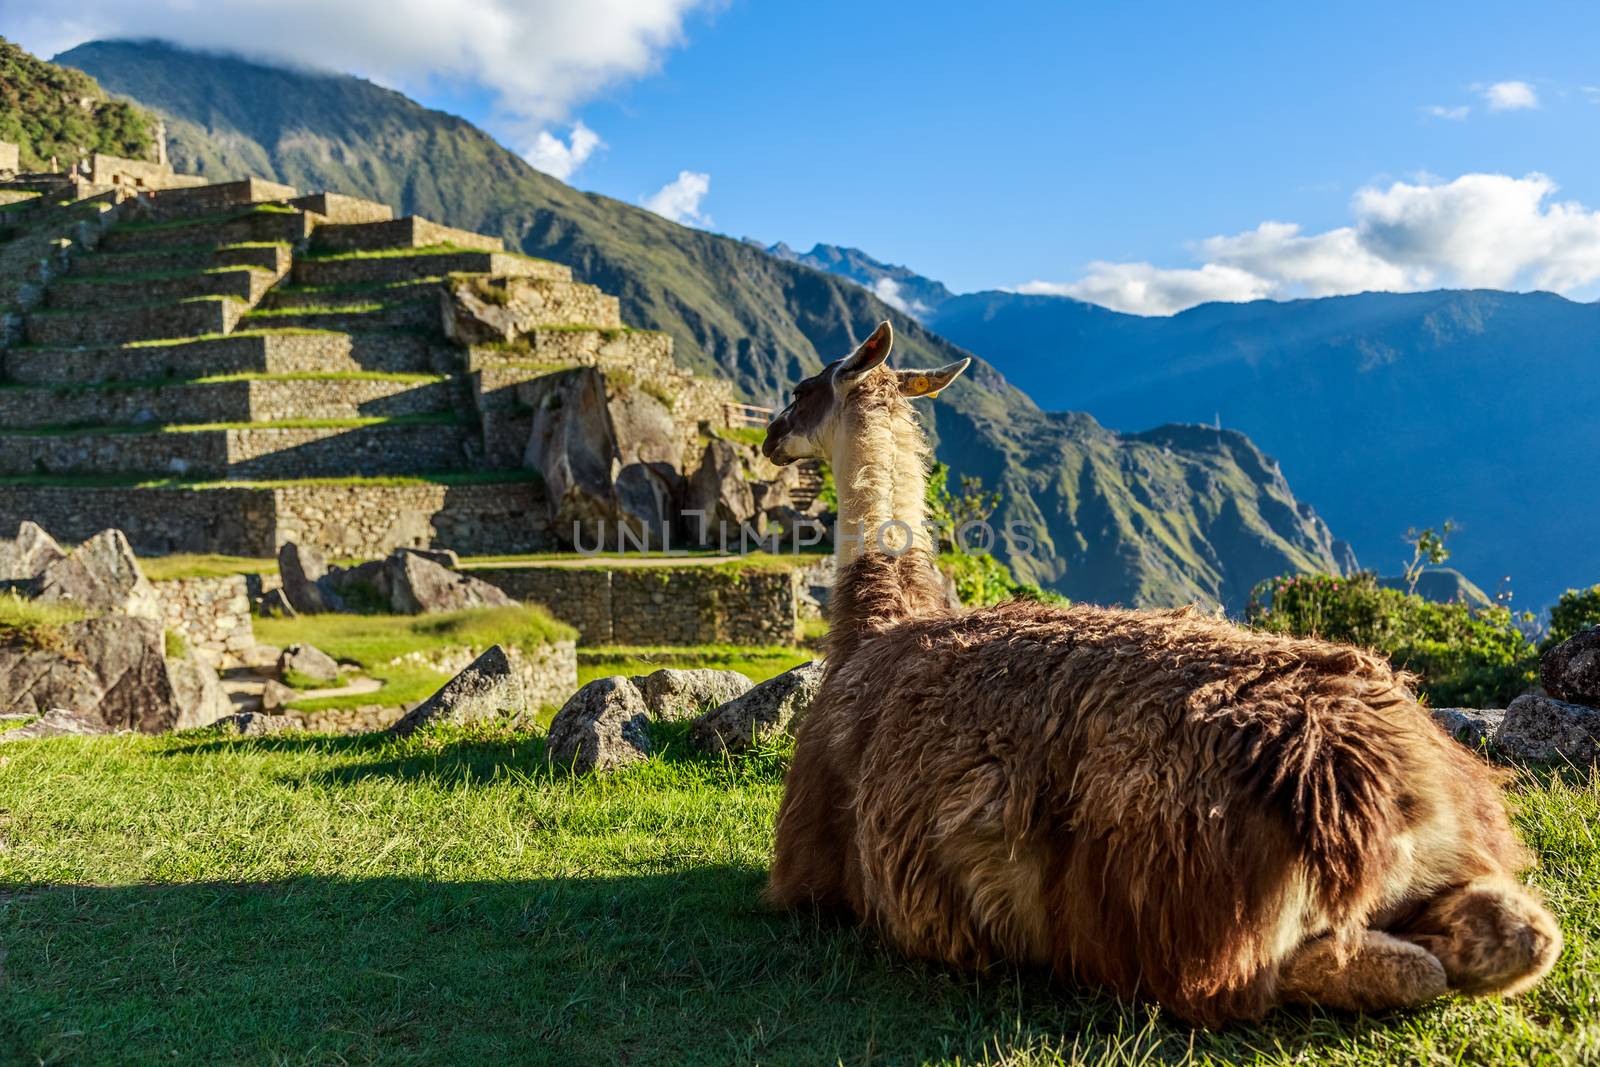 Lama sitting on the grass and looking at terrace of Machu Picchu